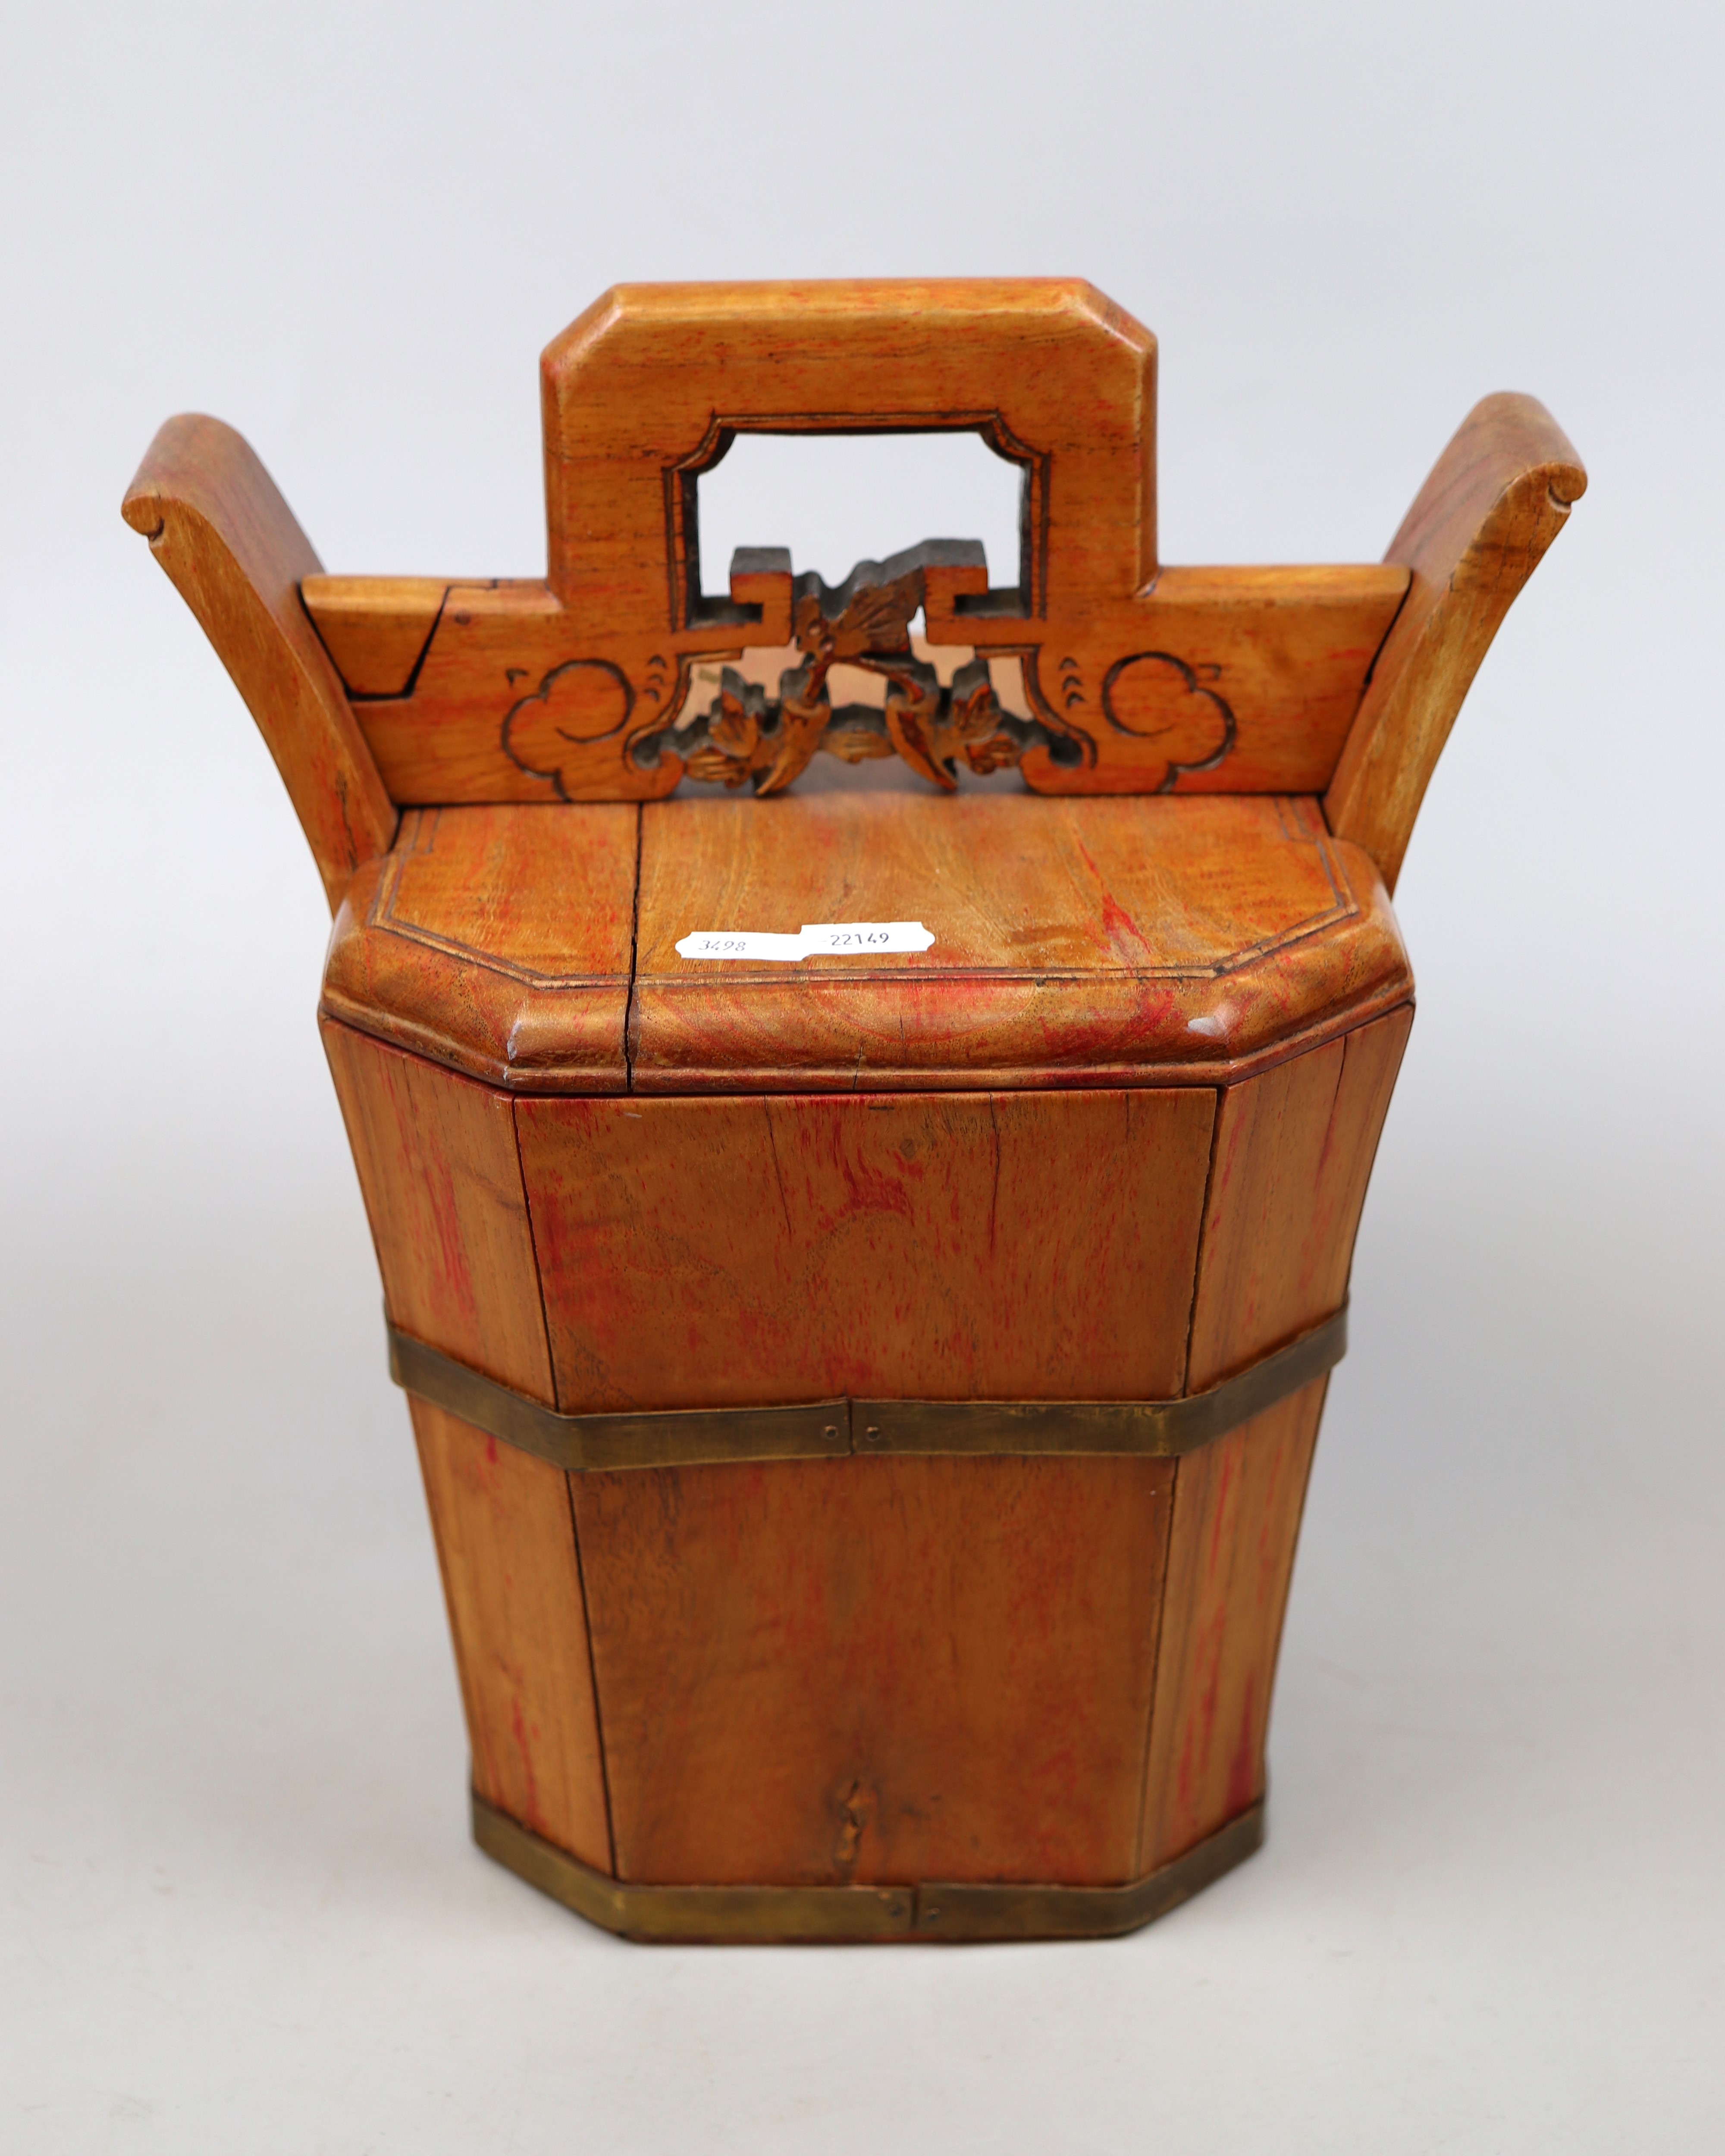 Chinese wooden rice basket - Image 3 of 6